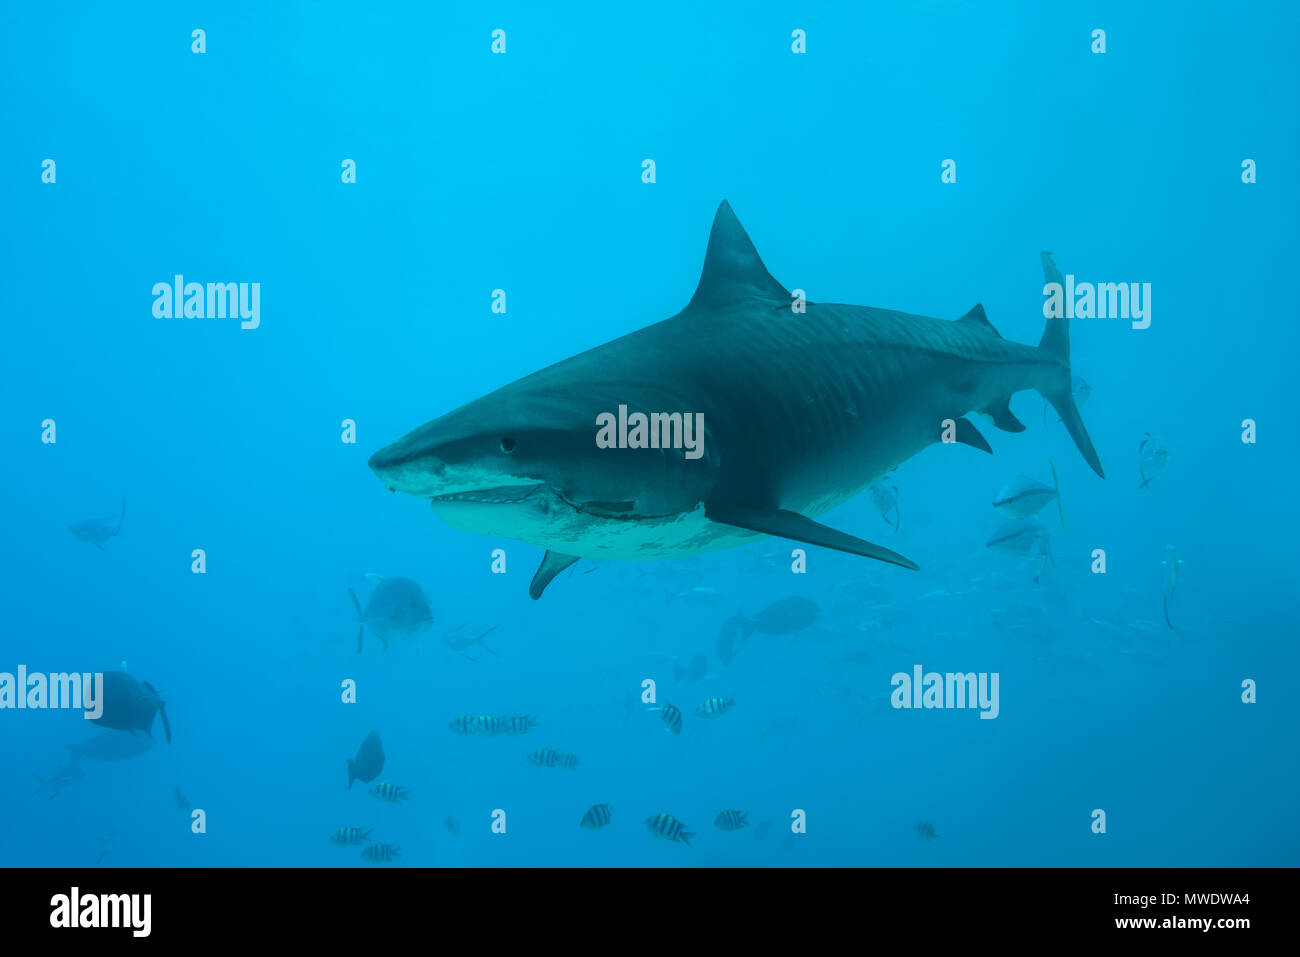 March 14, 2018 - Island (Atoll) Fuvahmulah, Indi, Maldives - Tiger Shark (Galeocerdo cuvier) with a fishing hook in the mouth swims in the blue water Credit: Andrey Nekrasov/ZUMA Wire/ZUMAPRESS.com/Alamy Live News Stock Photo